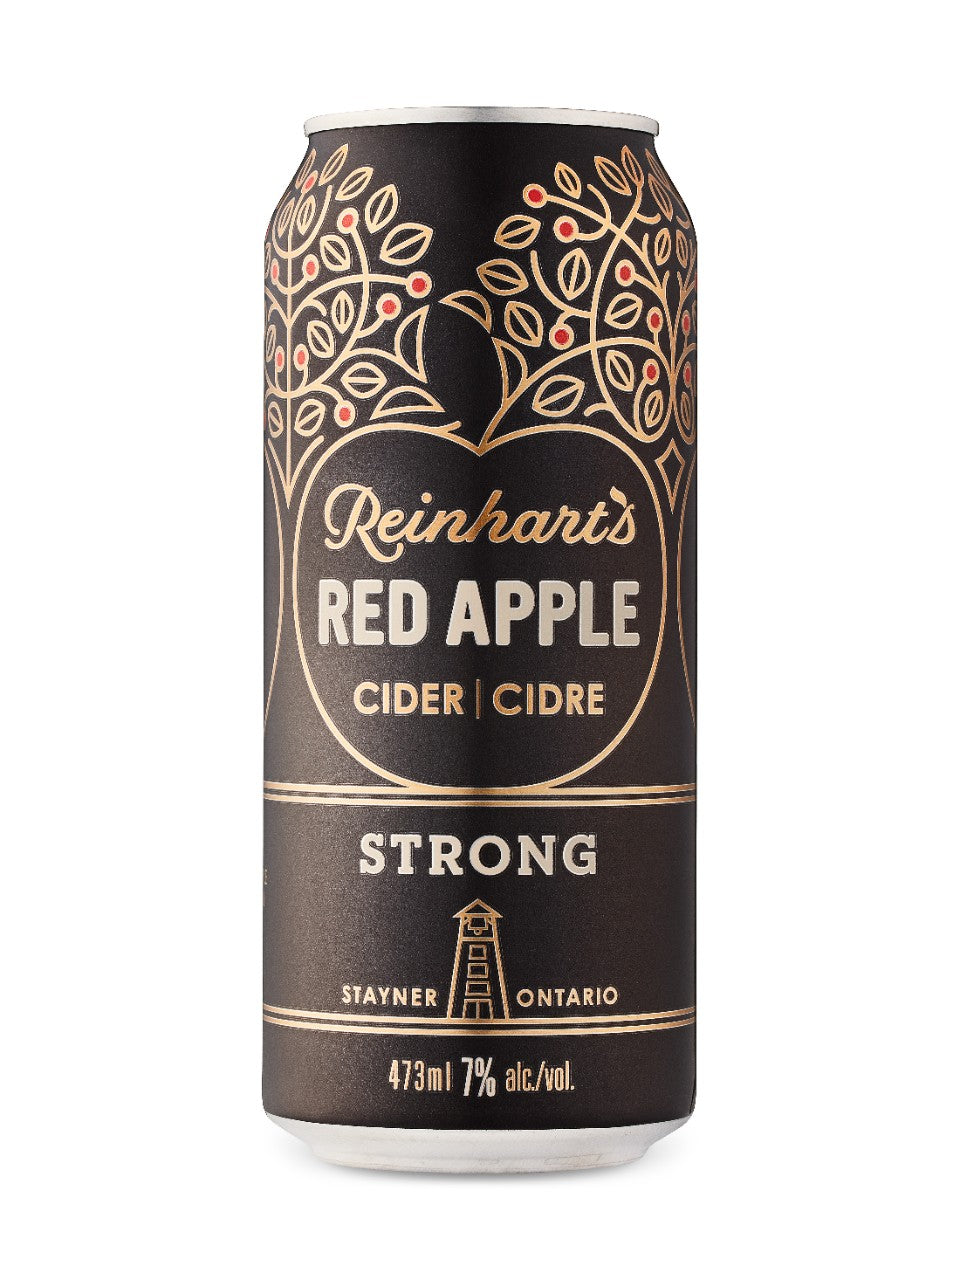 Reinhart's Red Apple Strong Cider 473 mL can